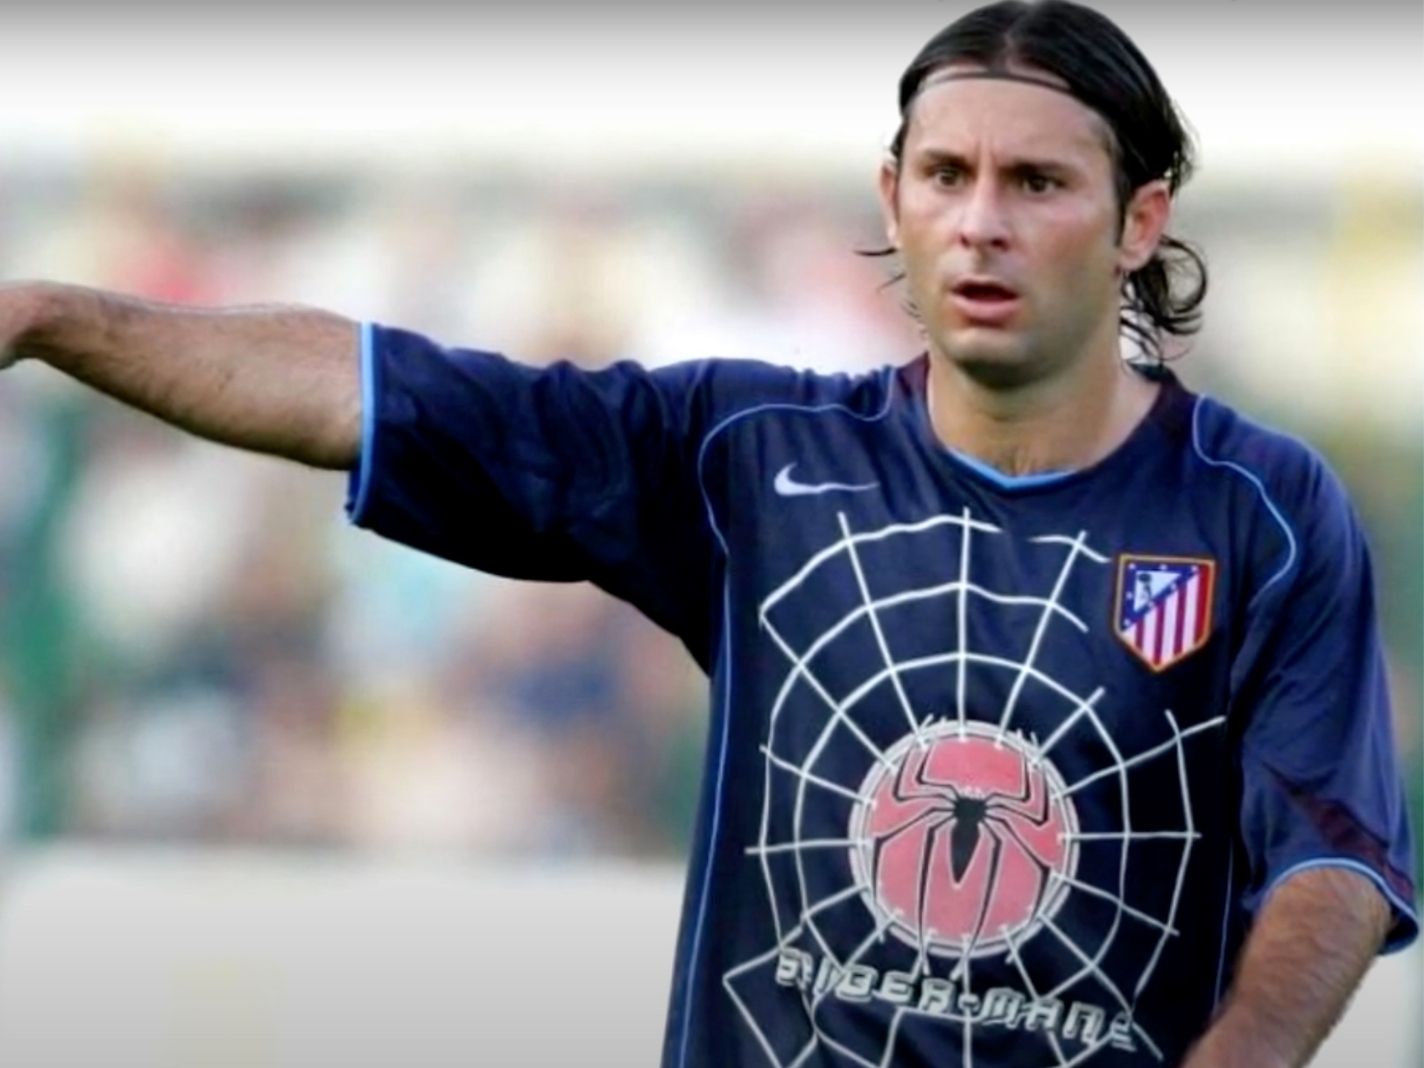 Throwback to when Atletico Madrid wore movie titles as shirt sponsor